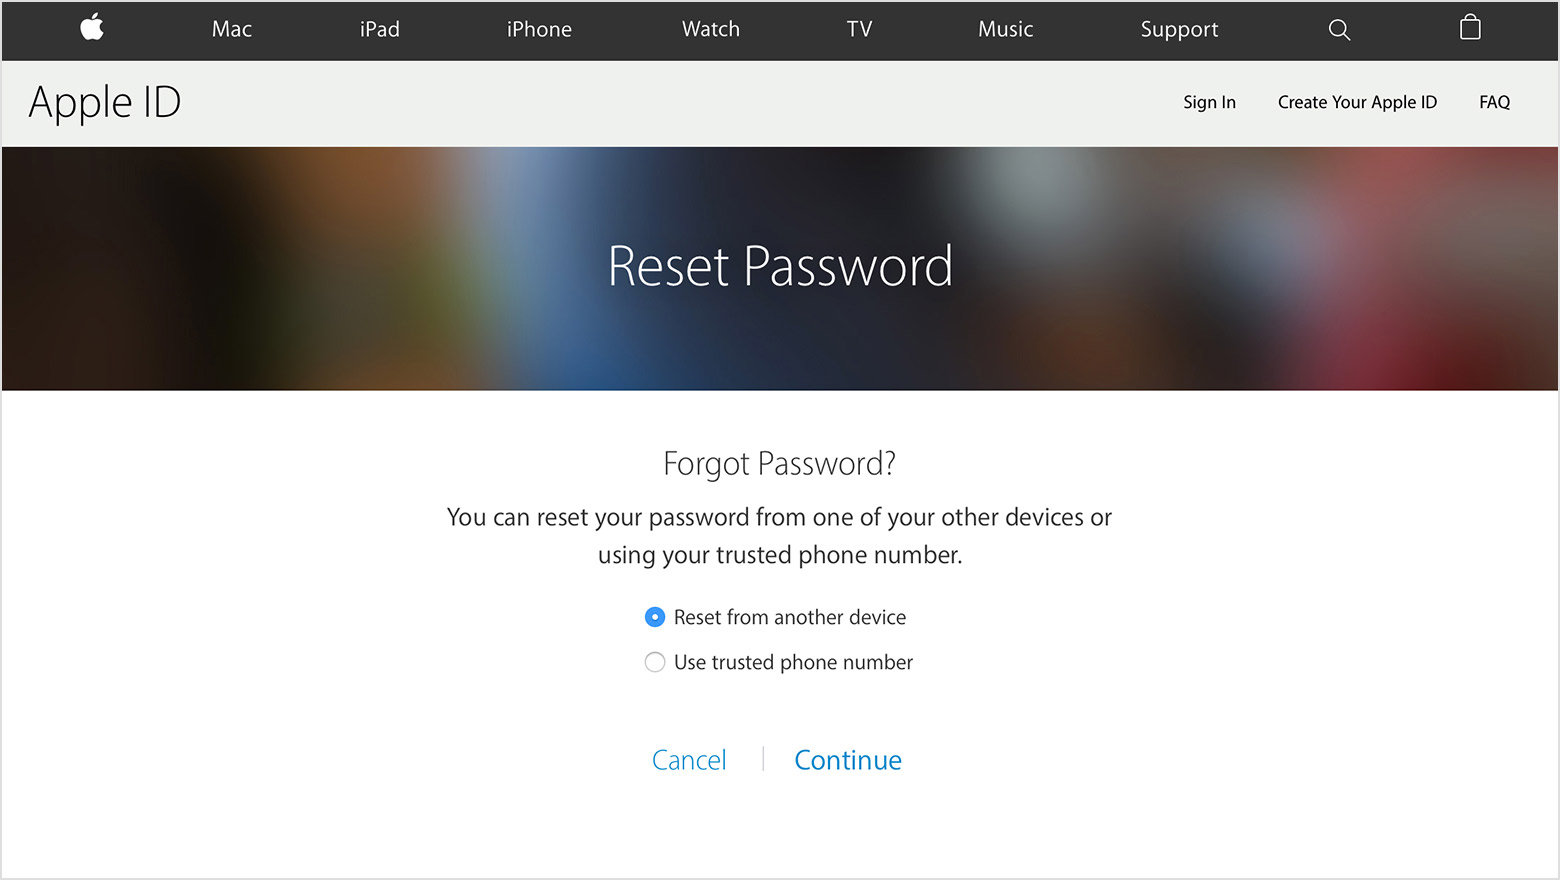 will avast removal tool work if i forgot password